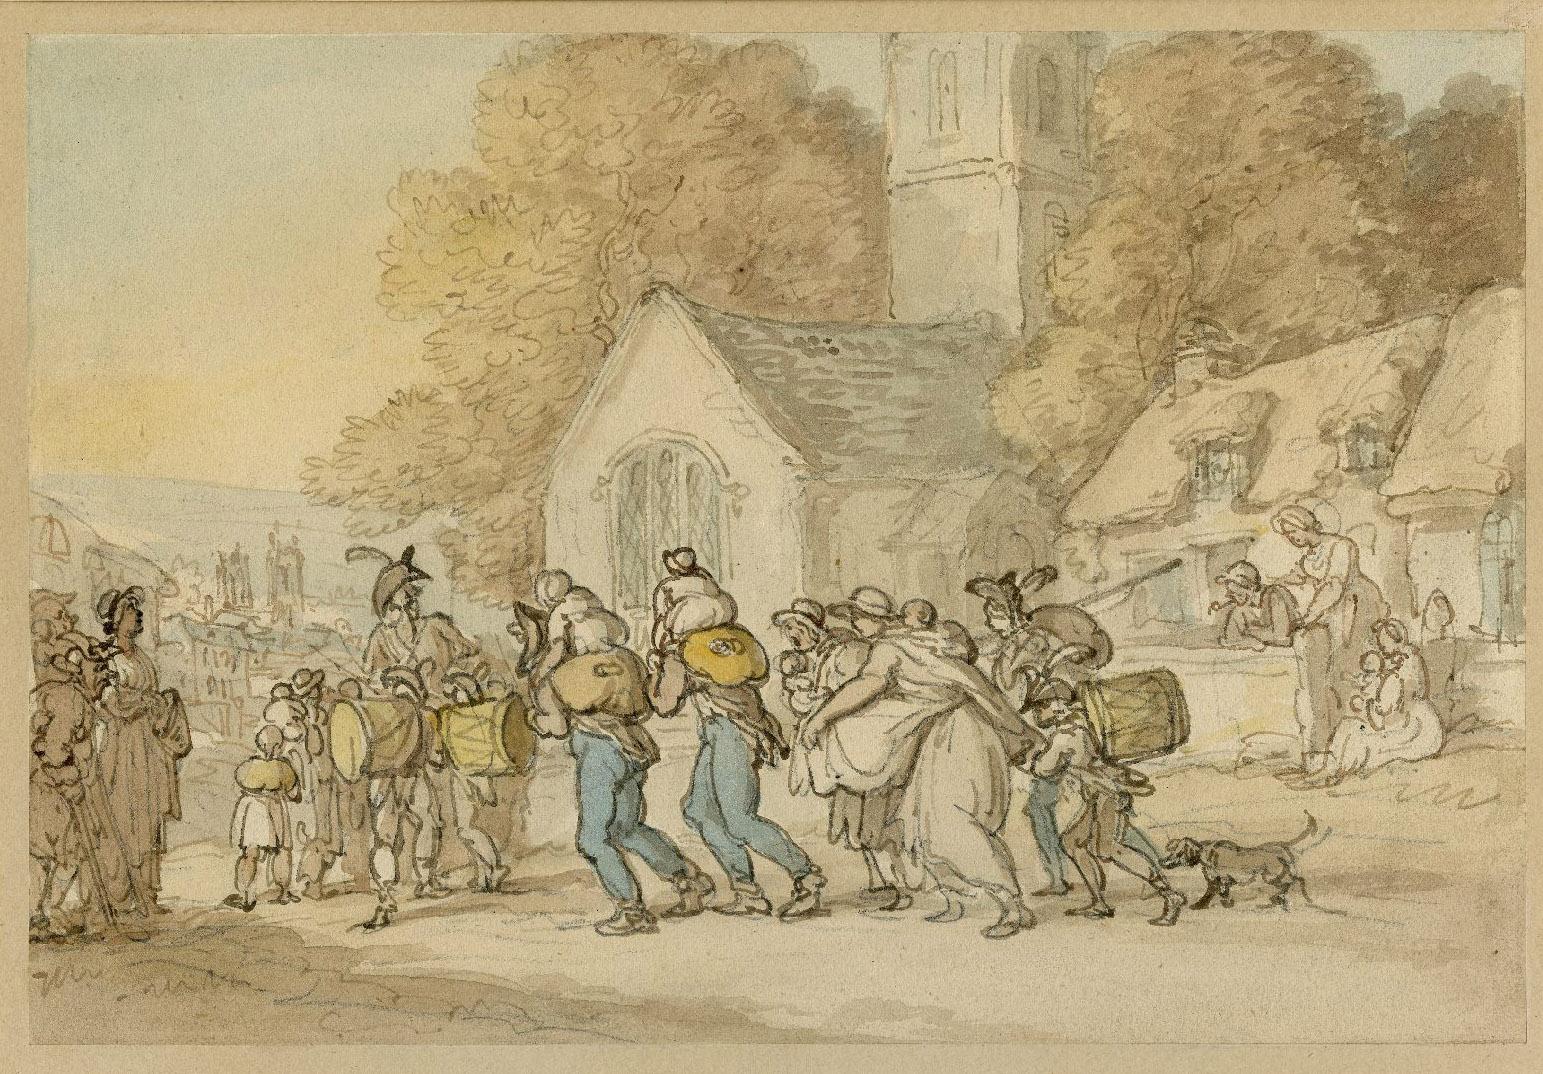 Recruits on a March - Art by Thomas Rowlandson